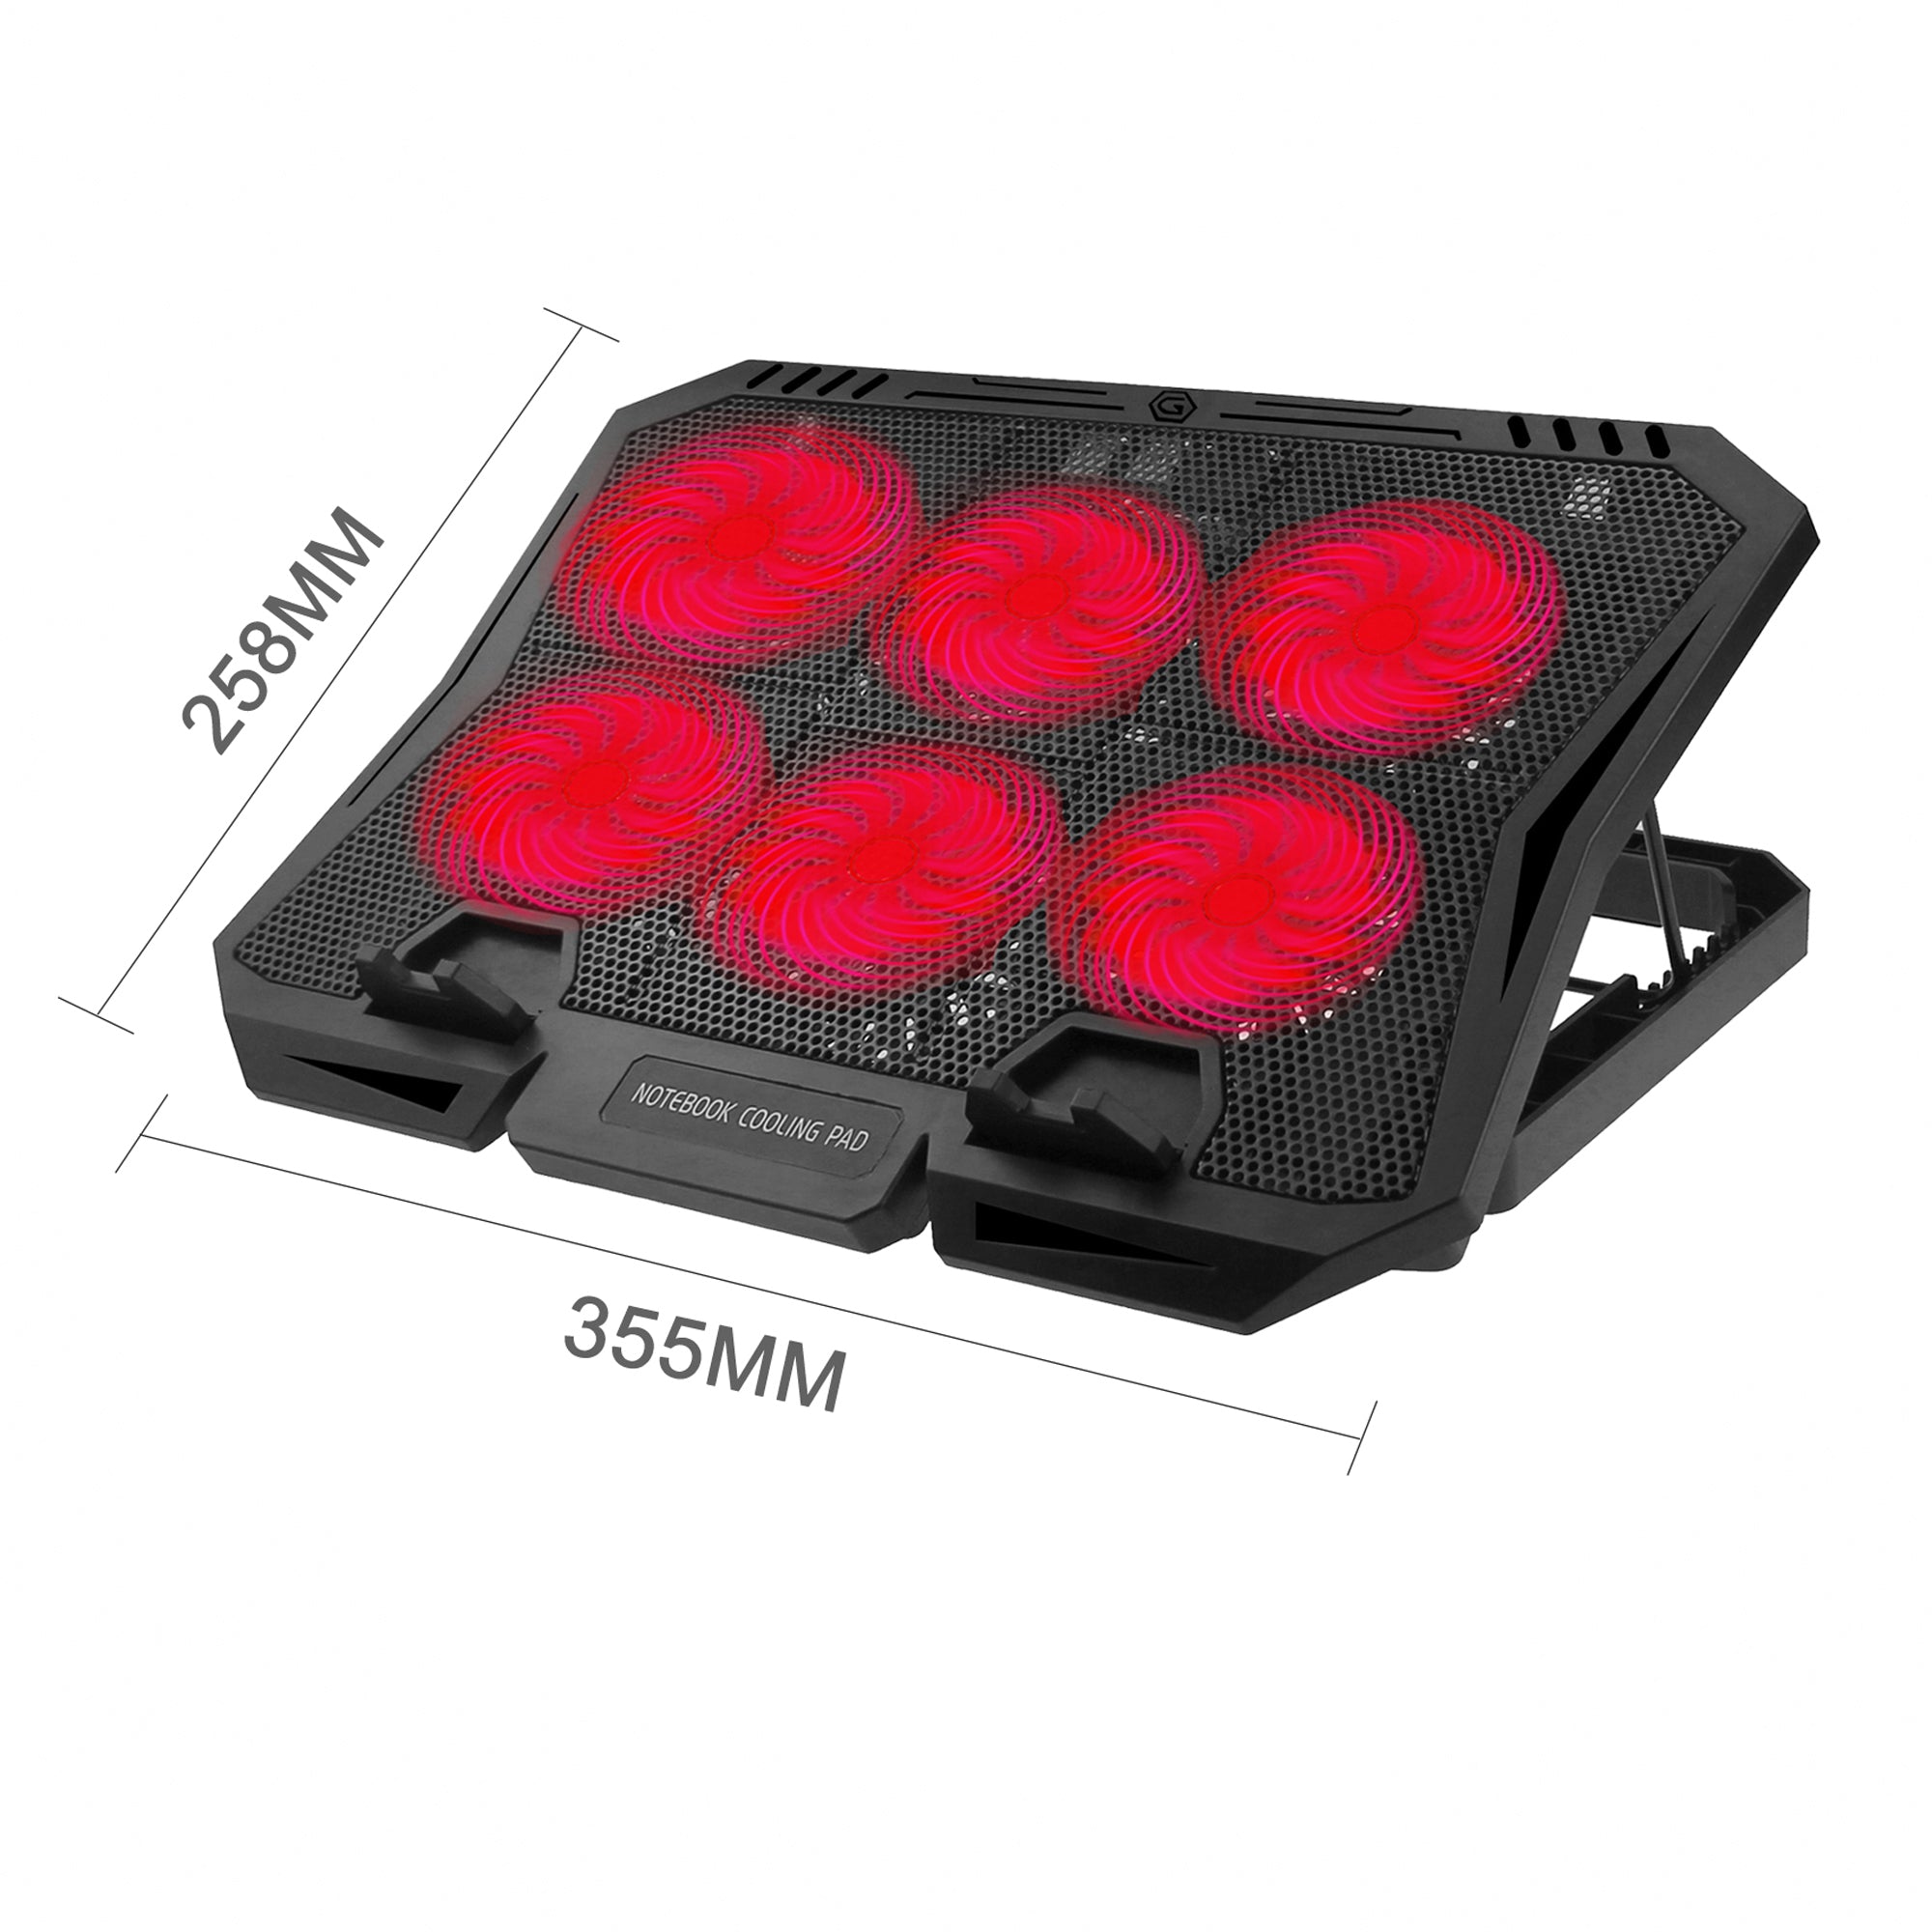 X6B 7-Gear Height 6-Fan Laptop Cooling Stand Adjustable Wind Speed Notebook Cooler - Red Light